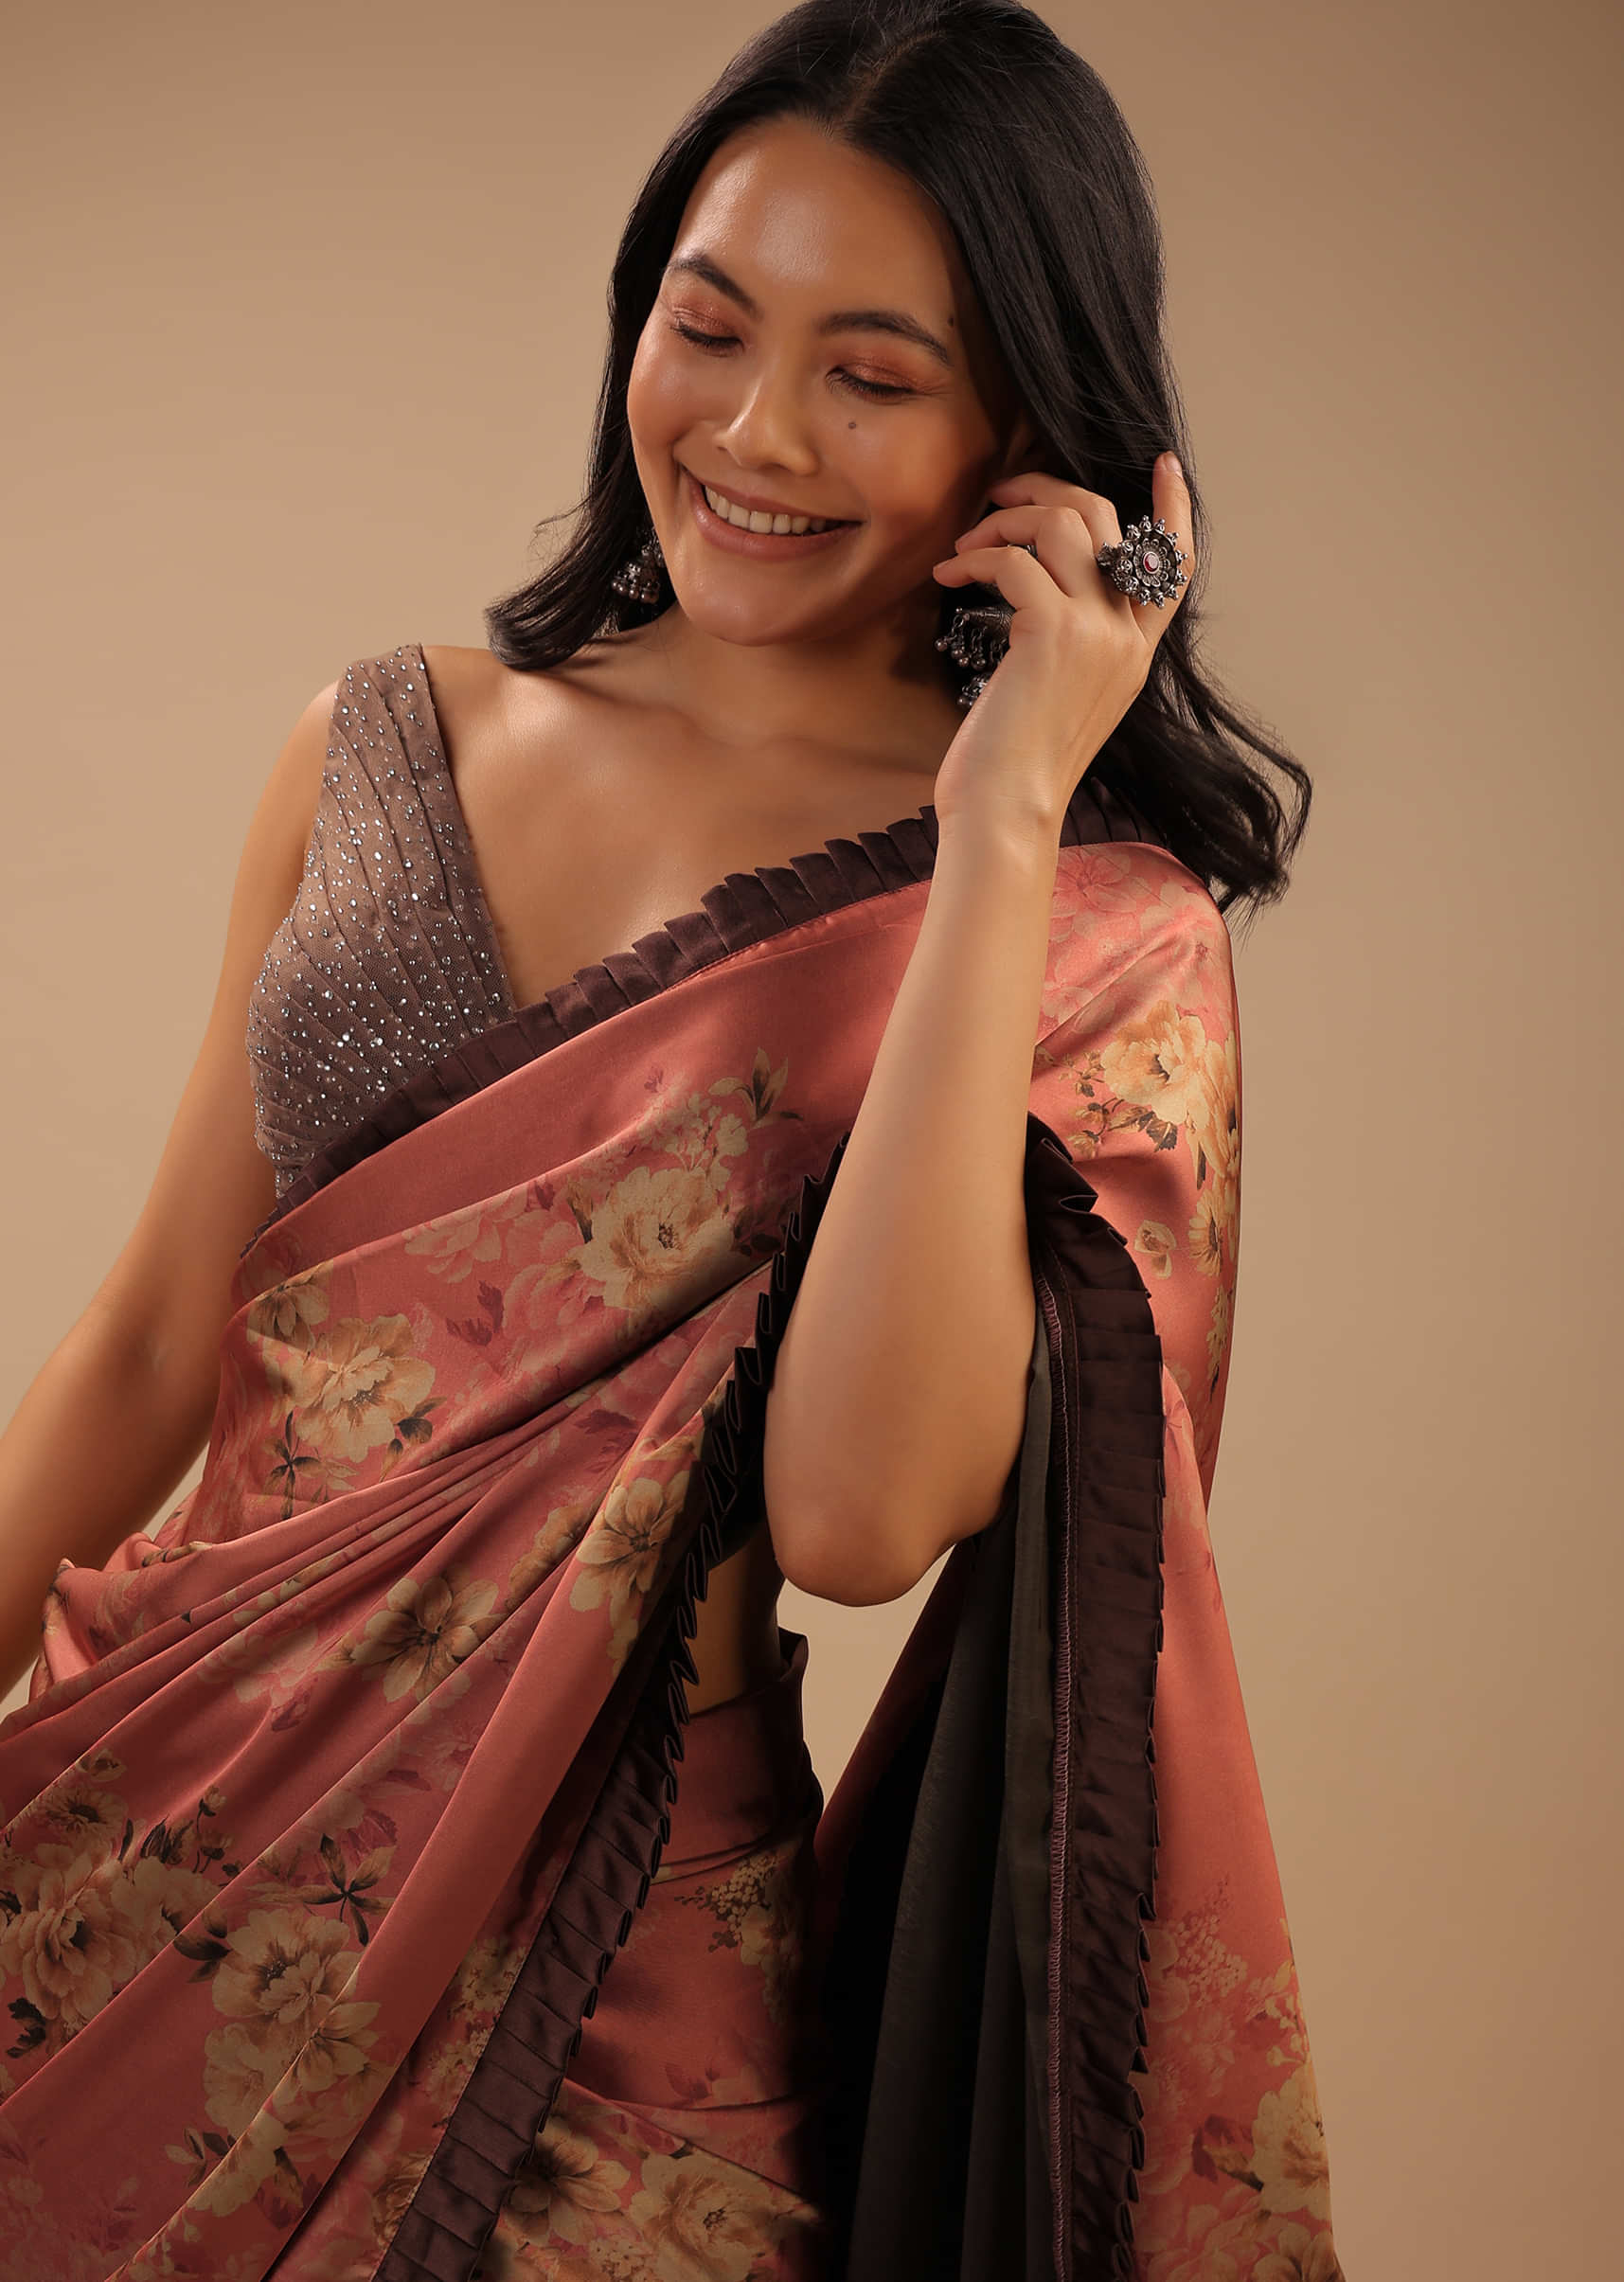 Coral Peach Saree With Brown Frill Borders And Floral Print